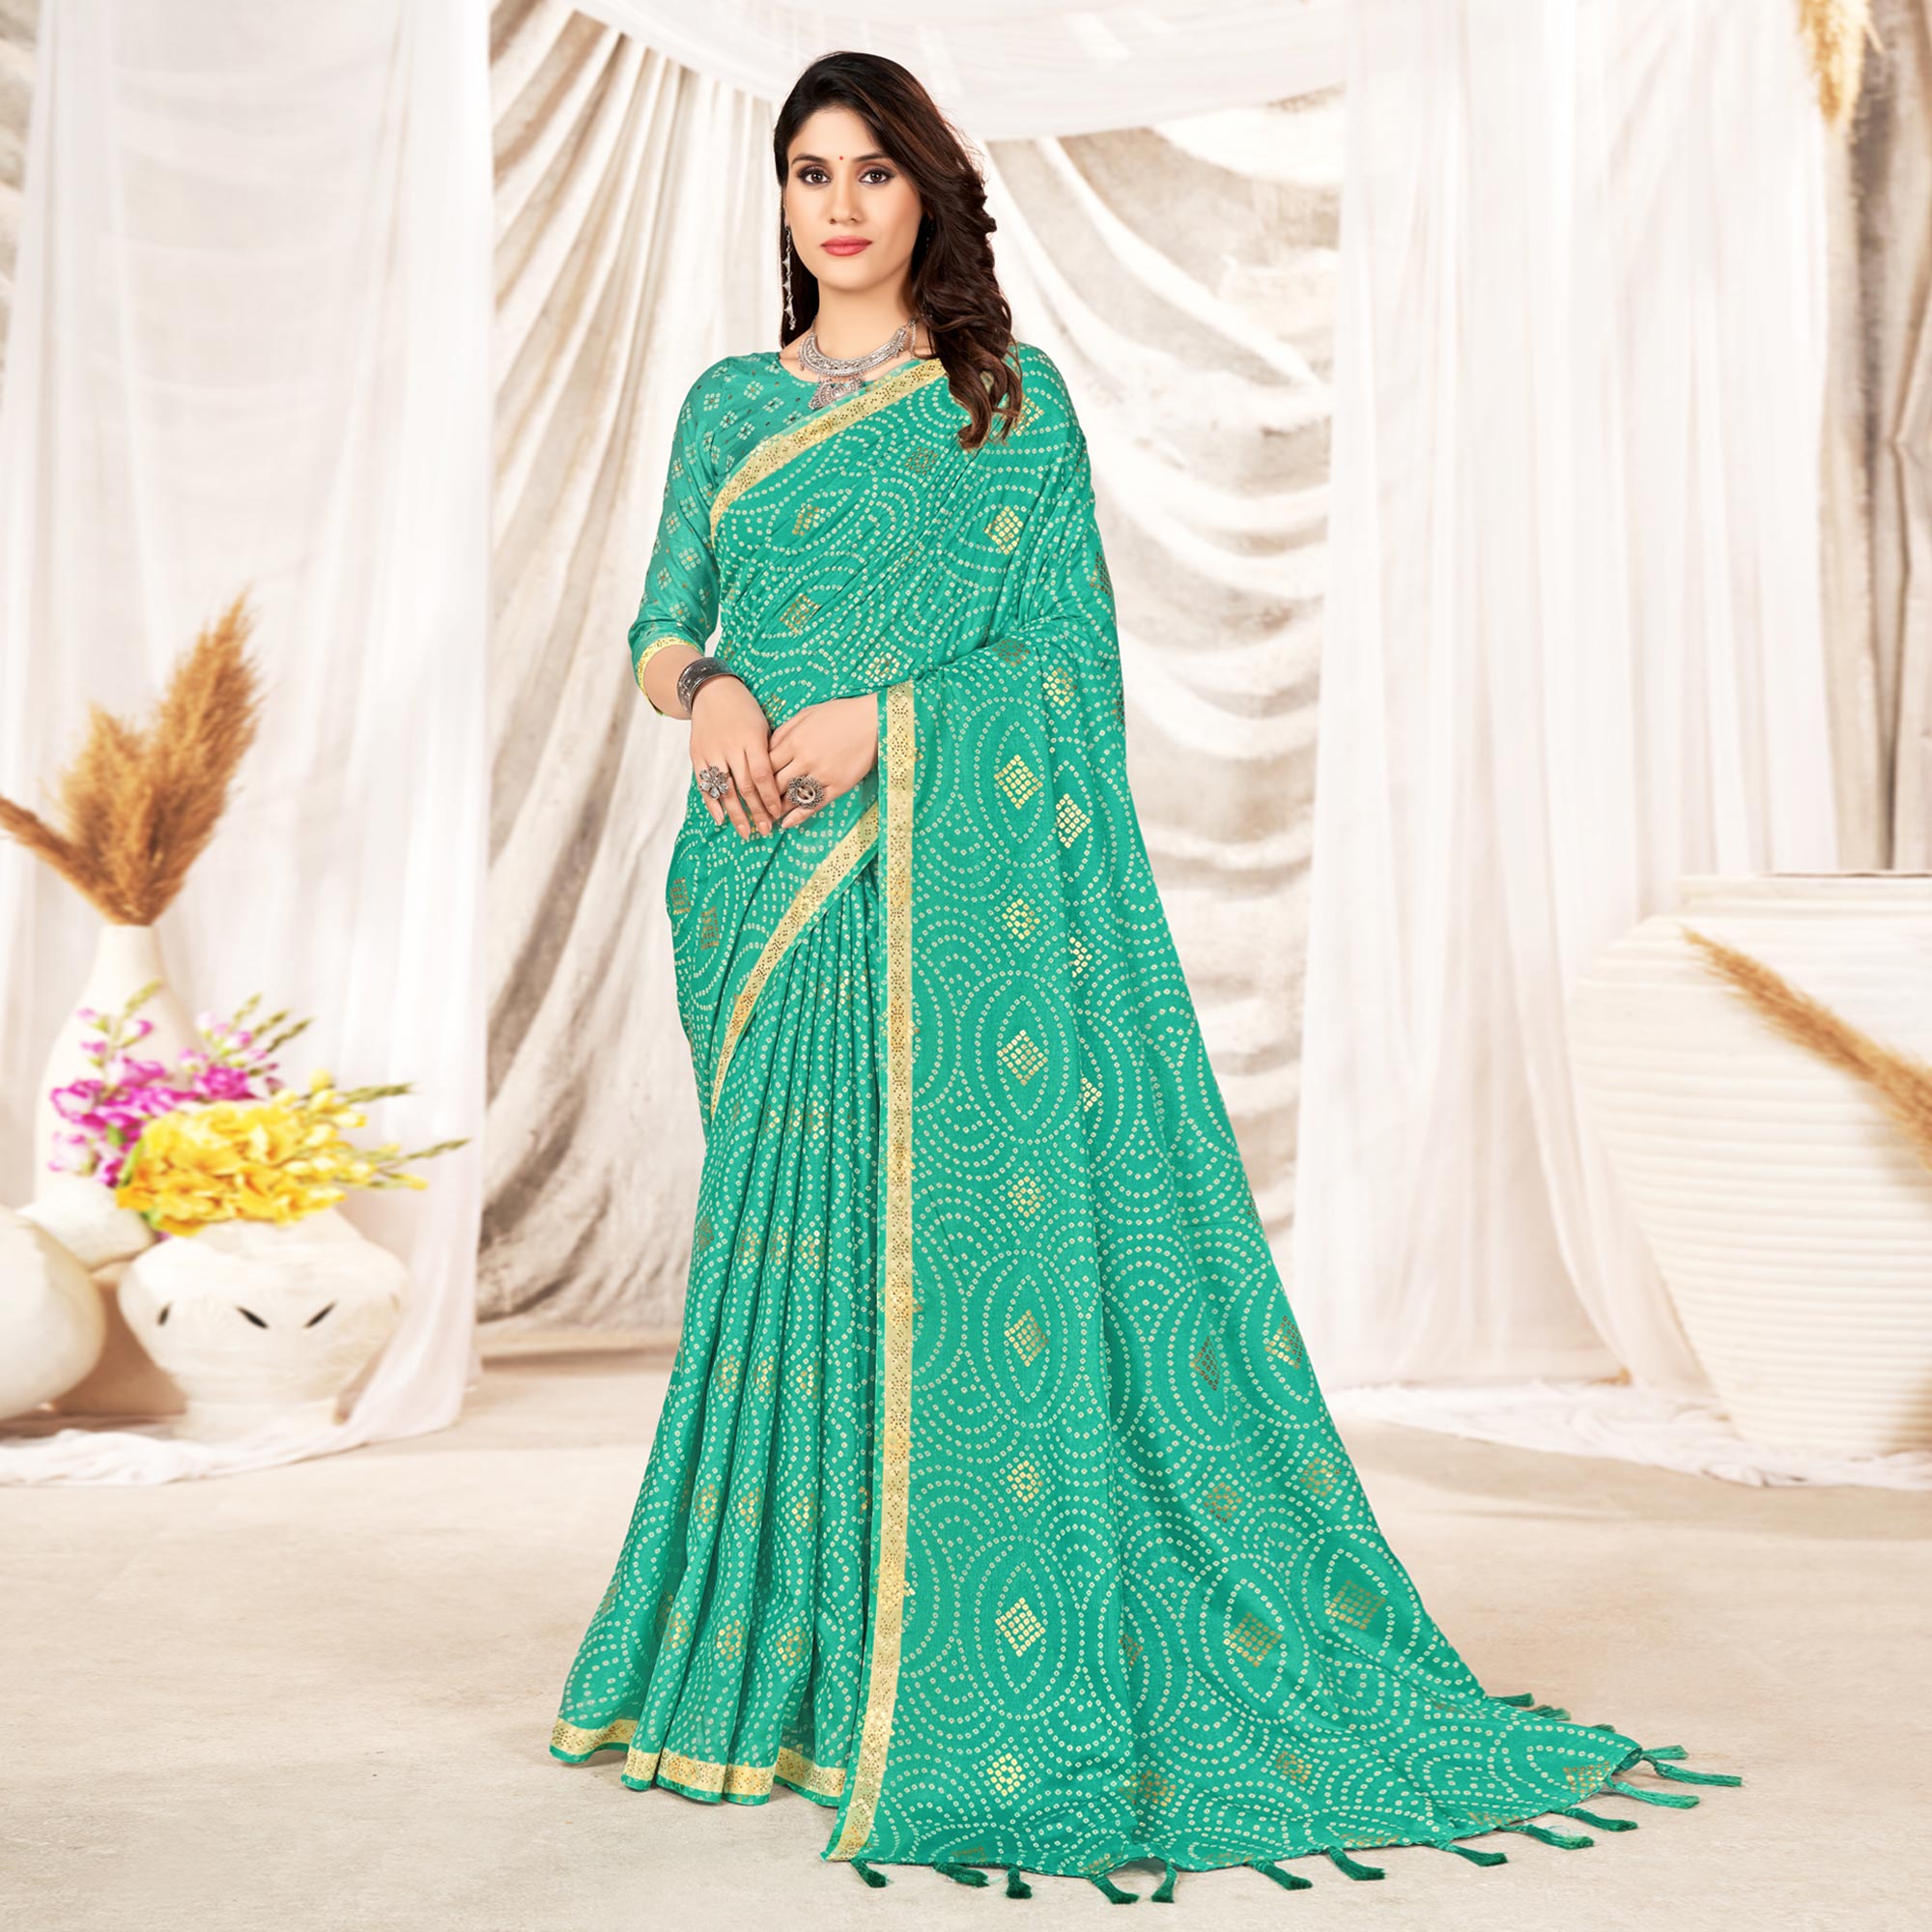 Turquoise Foil Printed Tussar Silk Saree With Tassels